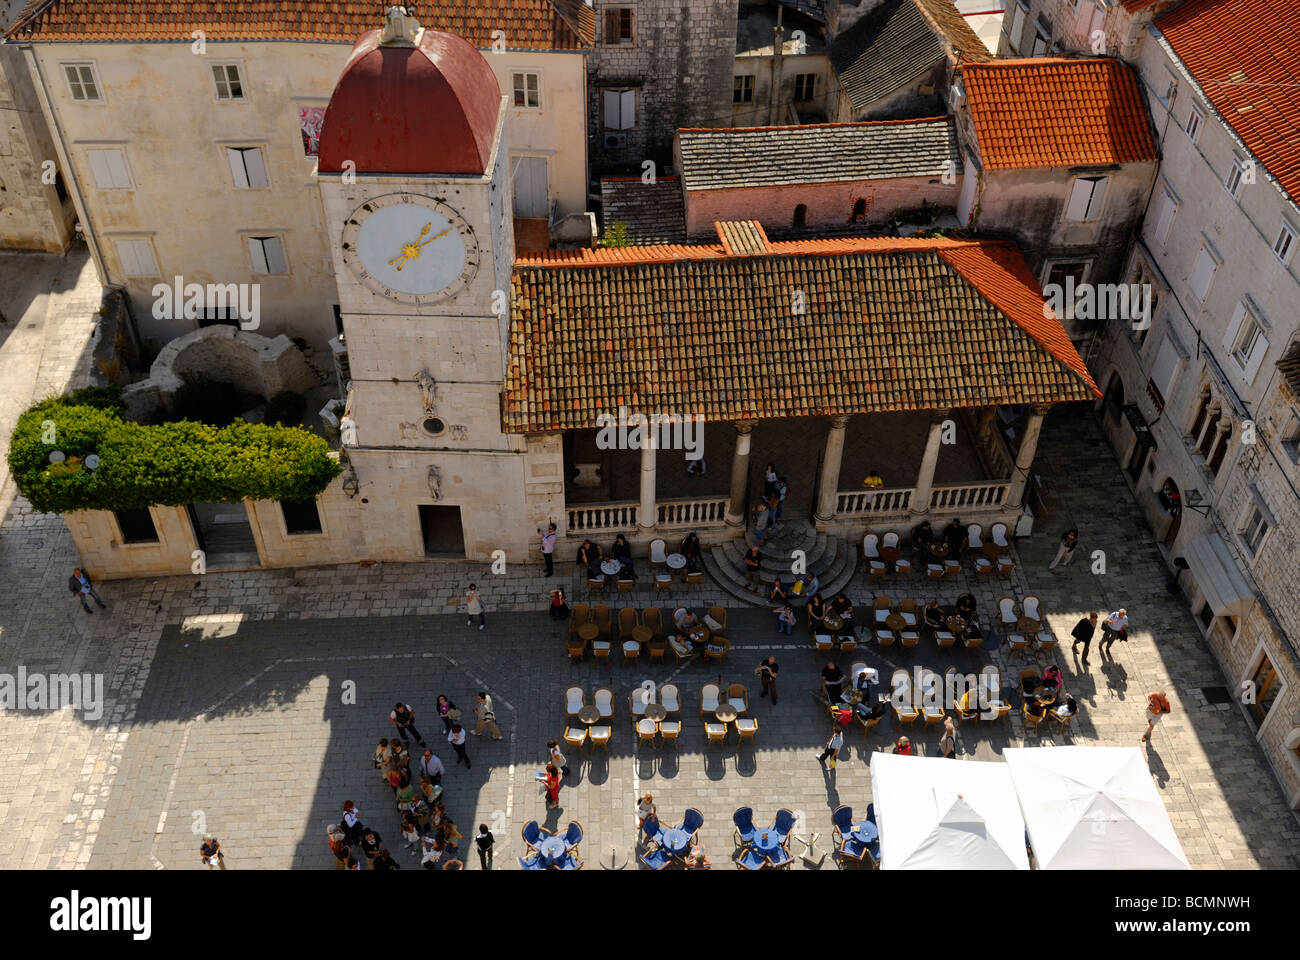 Loggia and Clock Tower from Belltower of Cathedral of St Lawrence at Trogir on Dalmatian Coast of Croatia Stock Photo